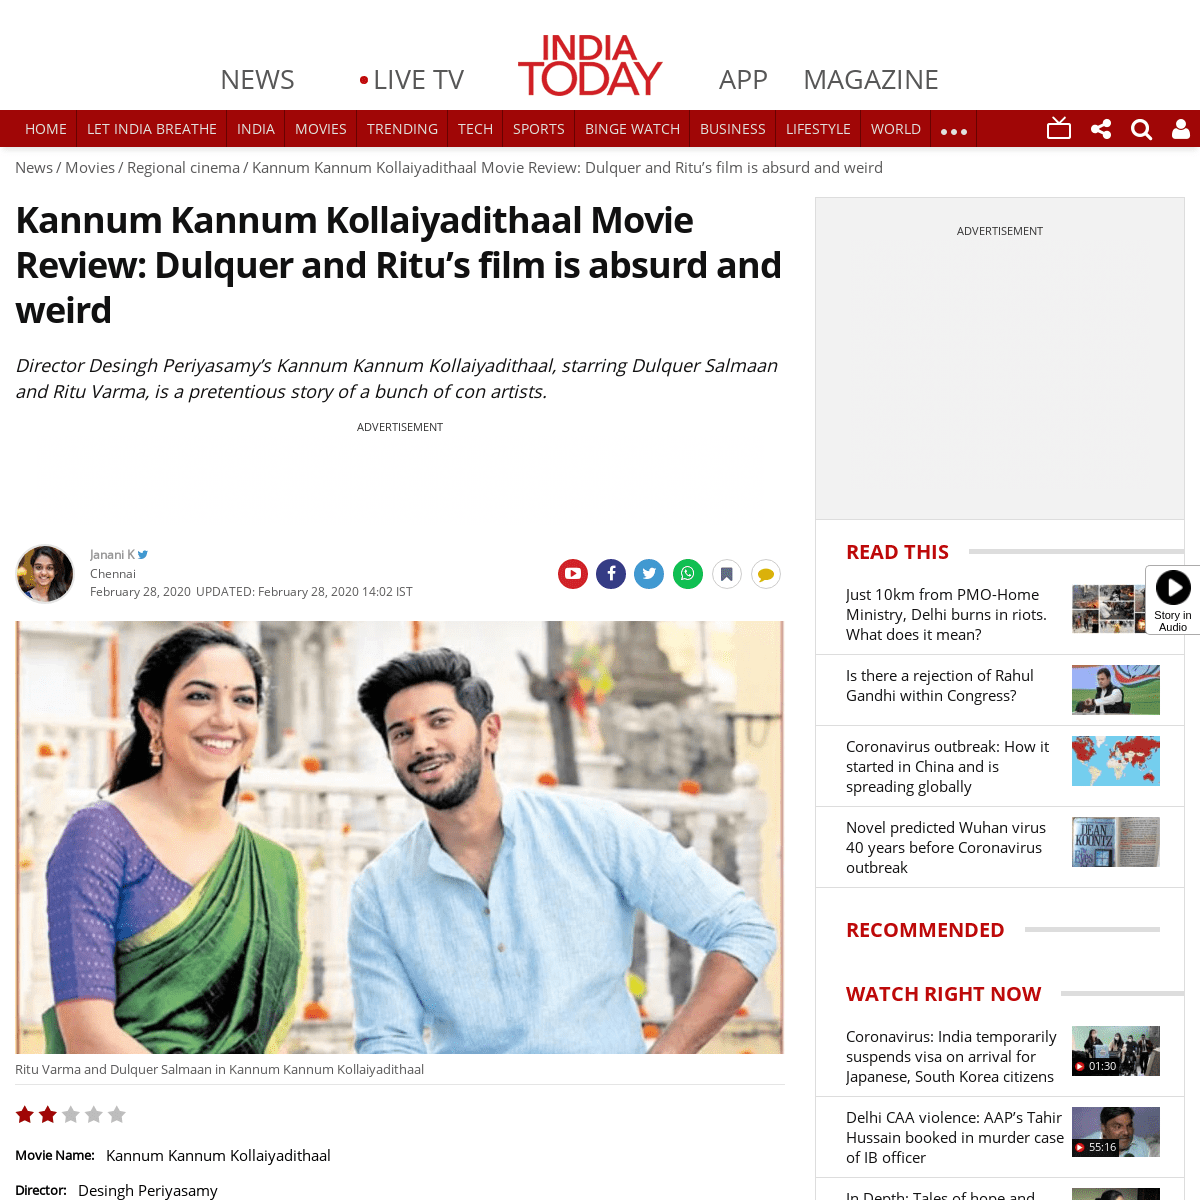 A complete backup of www.indiatoday.in/movies/regional-cinema/story/kannum-kannum-kollaiyadithaal-movie-review-dulquer-and-ritu-